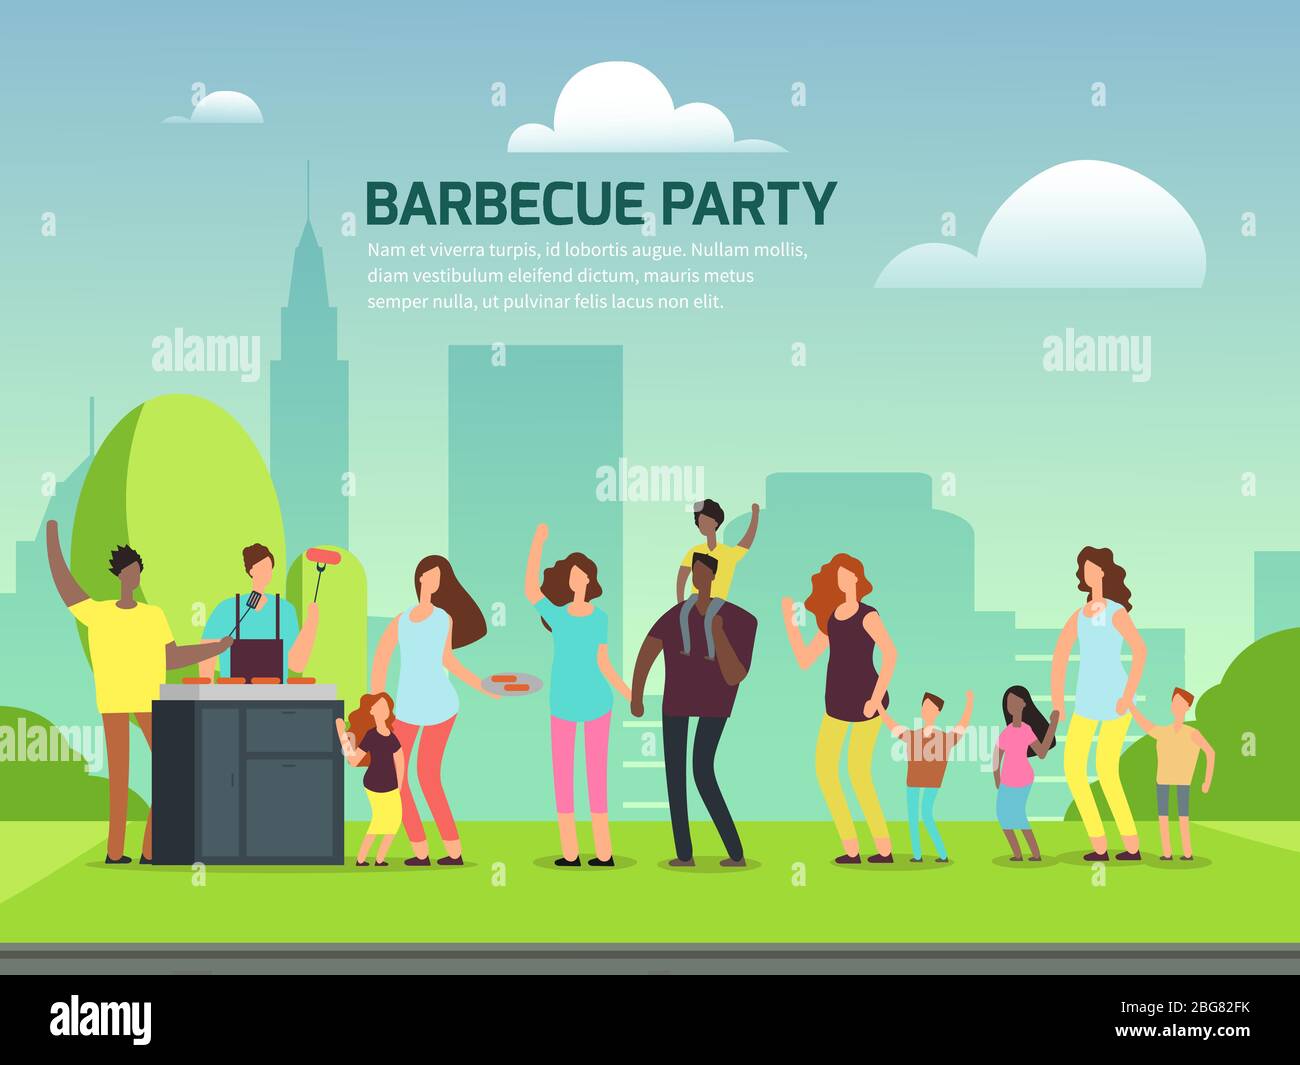 Barbeque party banner design. Cartoon character international families in park vector illustration Stock Vector